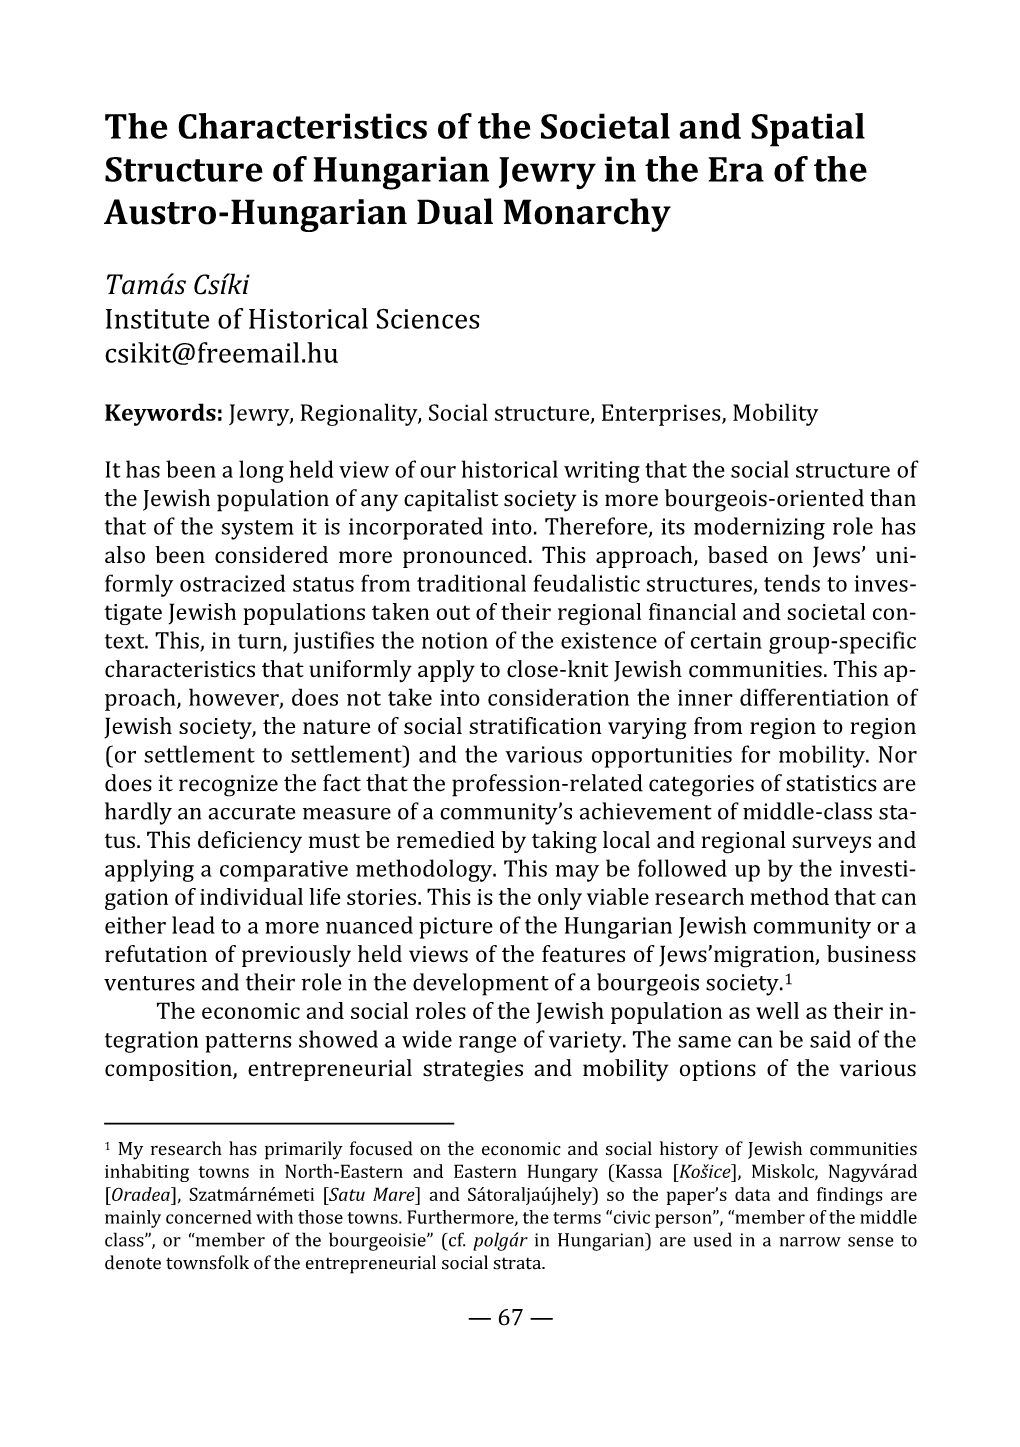 The Characteristics of the Societal and Spatial Structure of Hungarian Jewry in the Era of the Austro-Hungarian Dual Monarchy